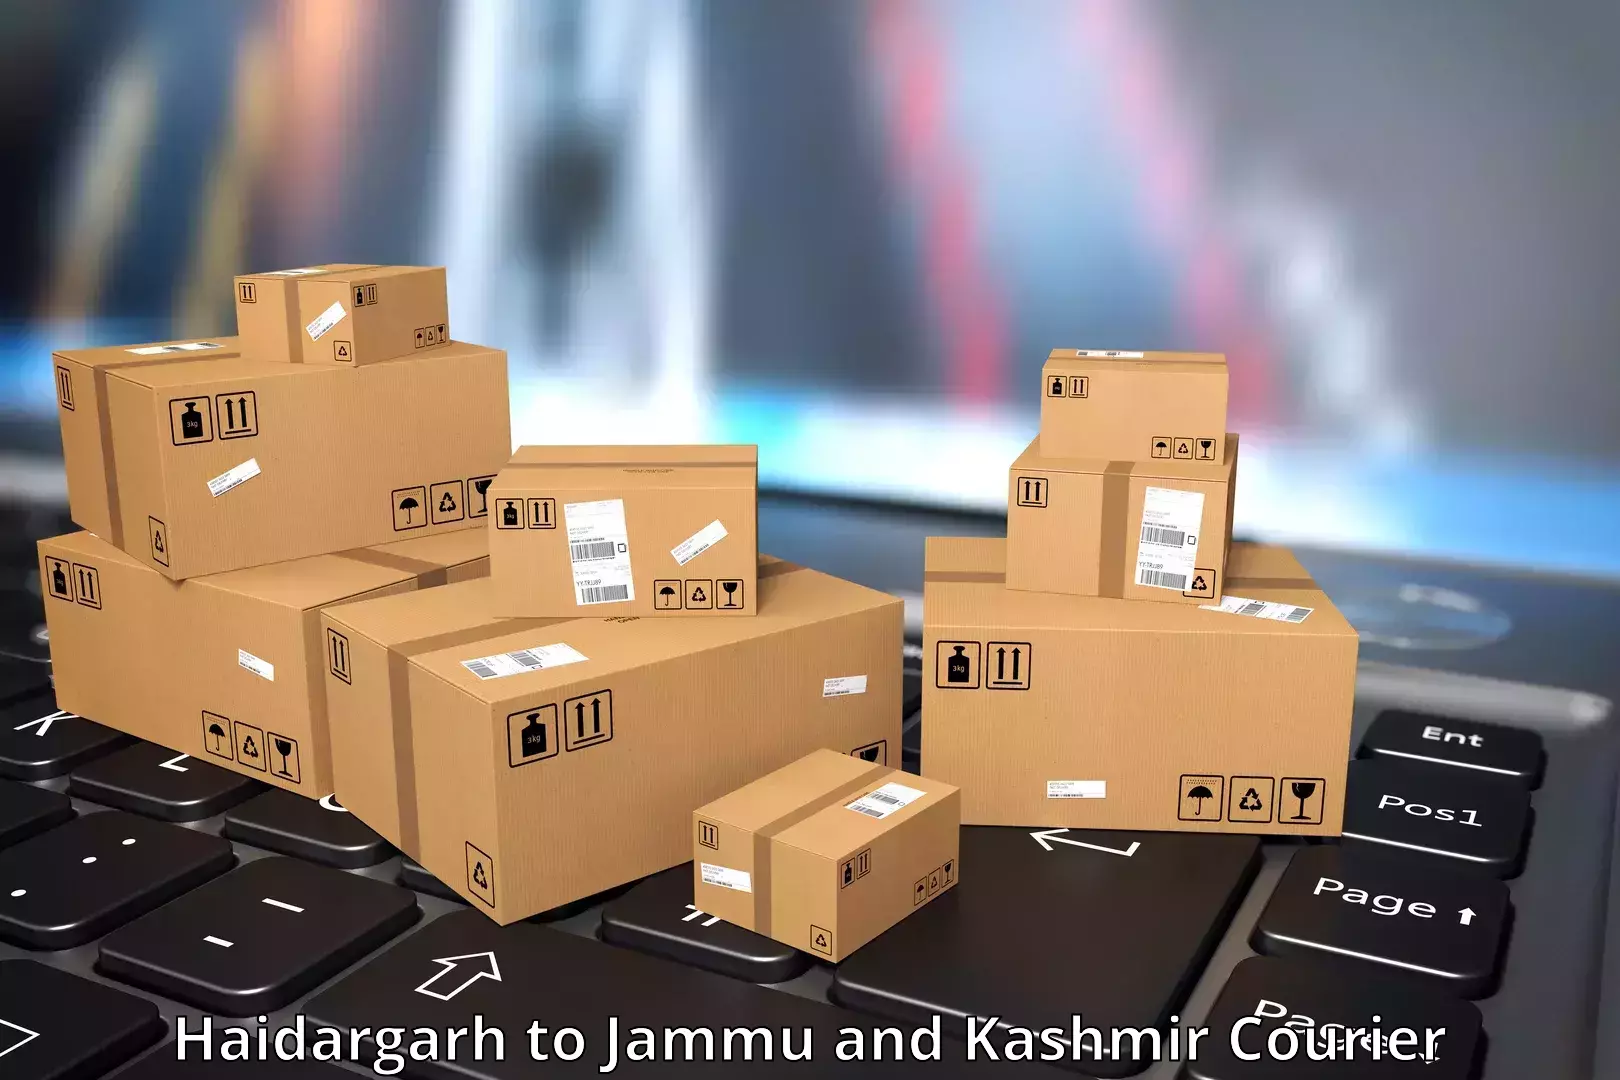 Emergency parcel delivery Haidargarh to Baramulla